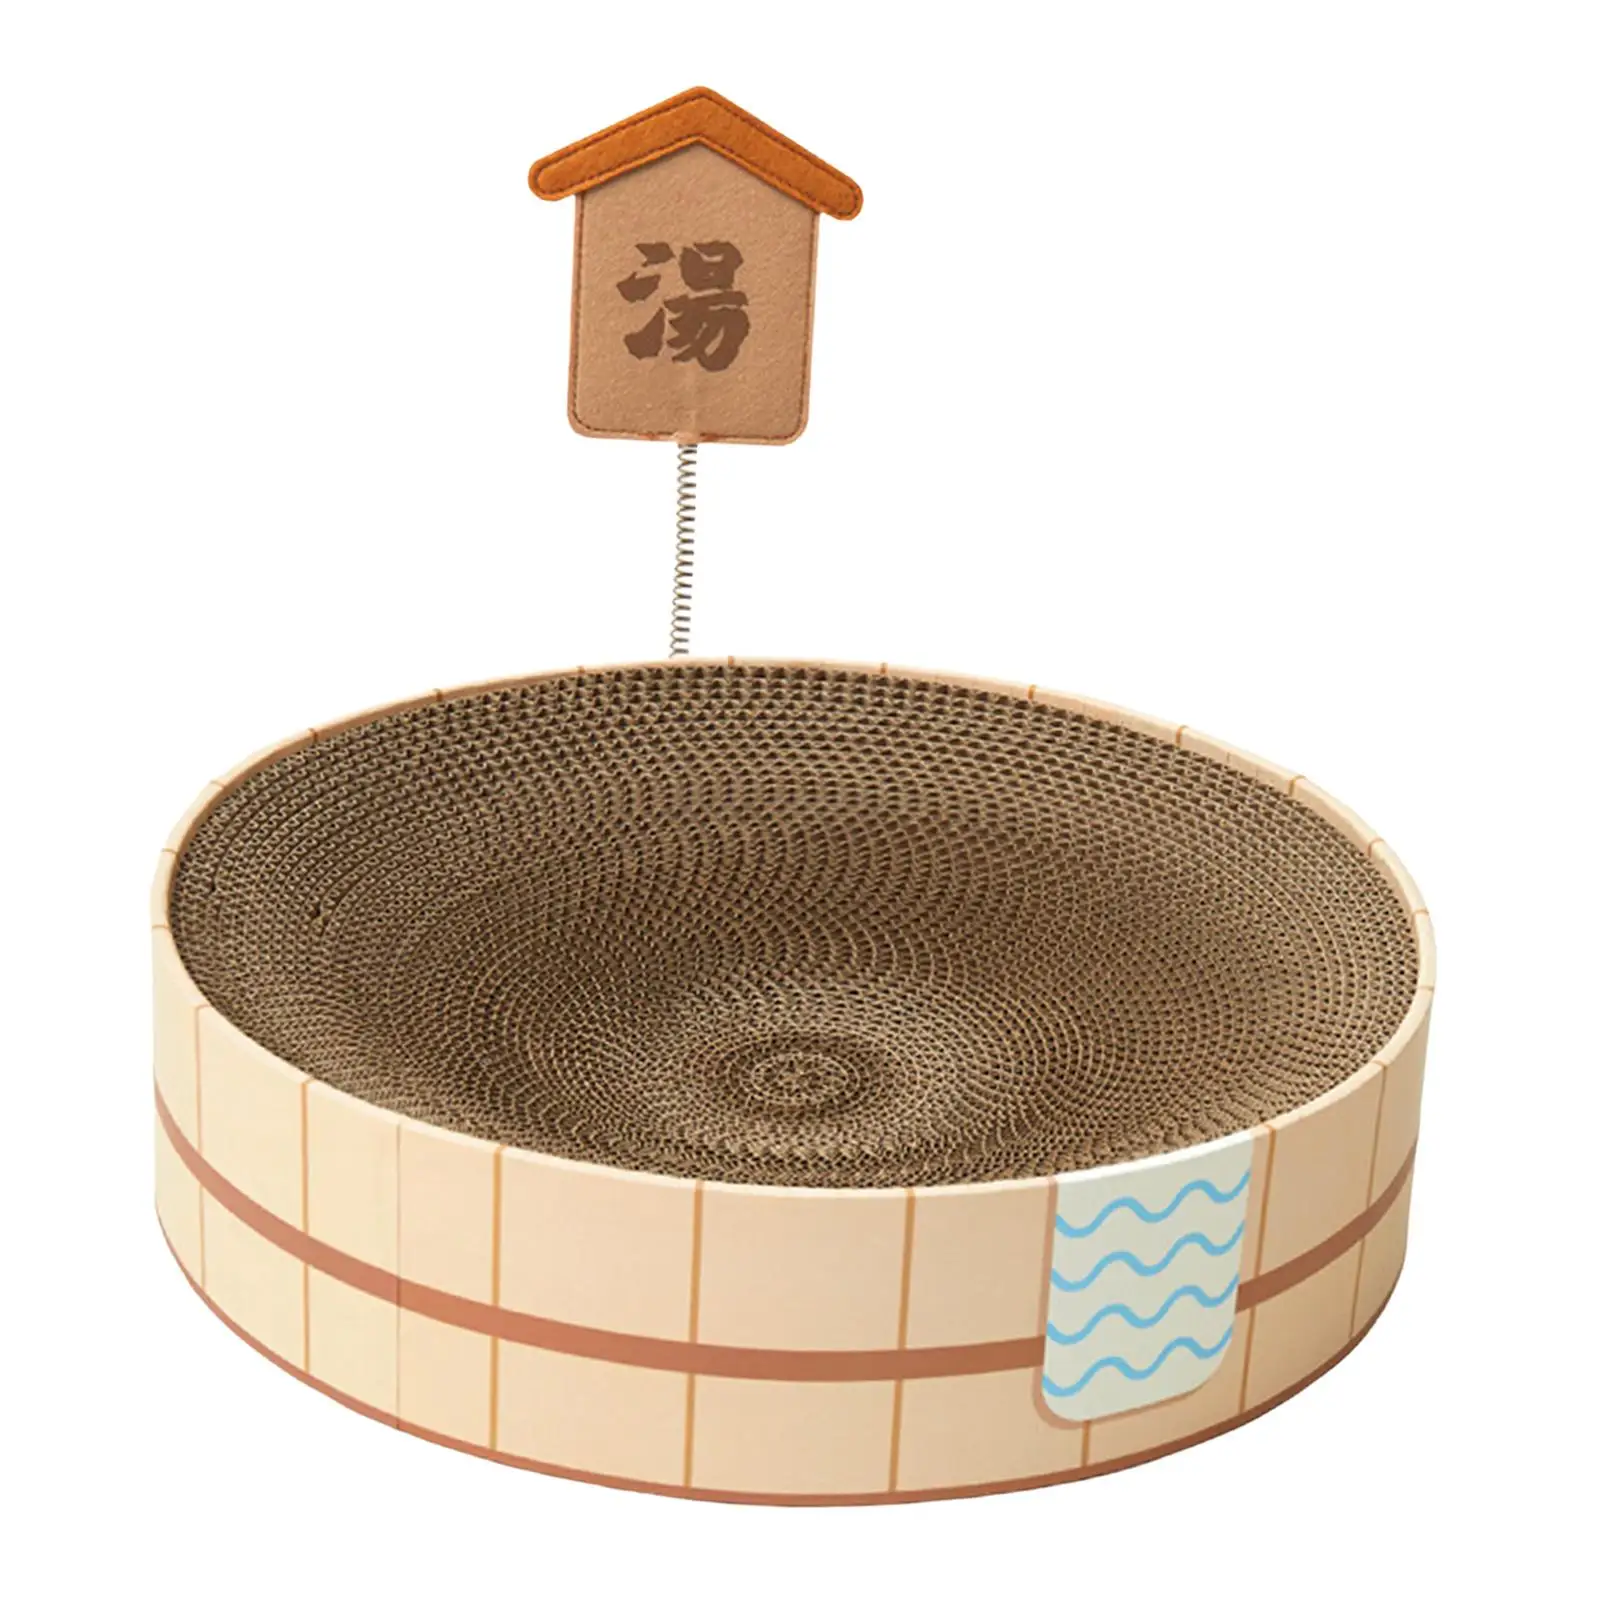 Round Cat Scratcher Cardboard Lounge Bed Cat Scratcher Bowl Sofa Corrugated Scratch Pad for Small Medium Large Cats Playing